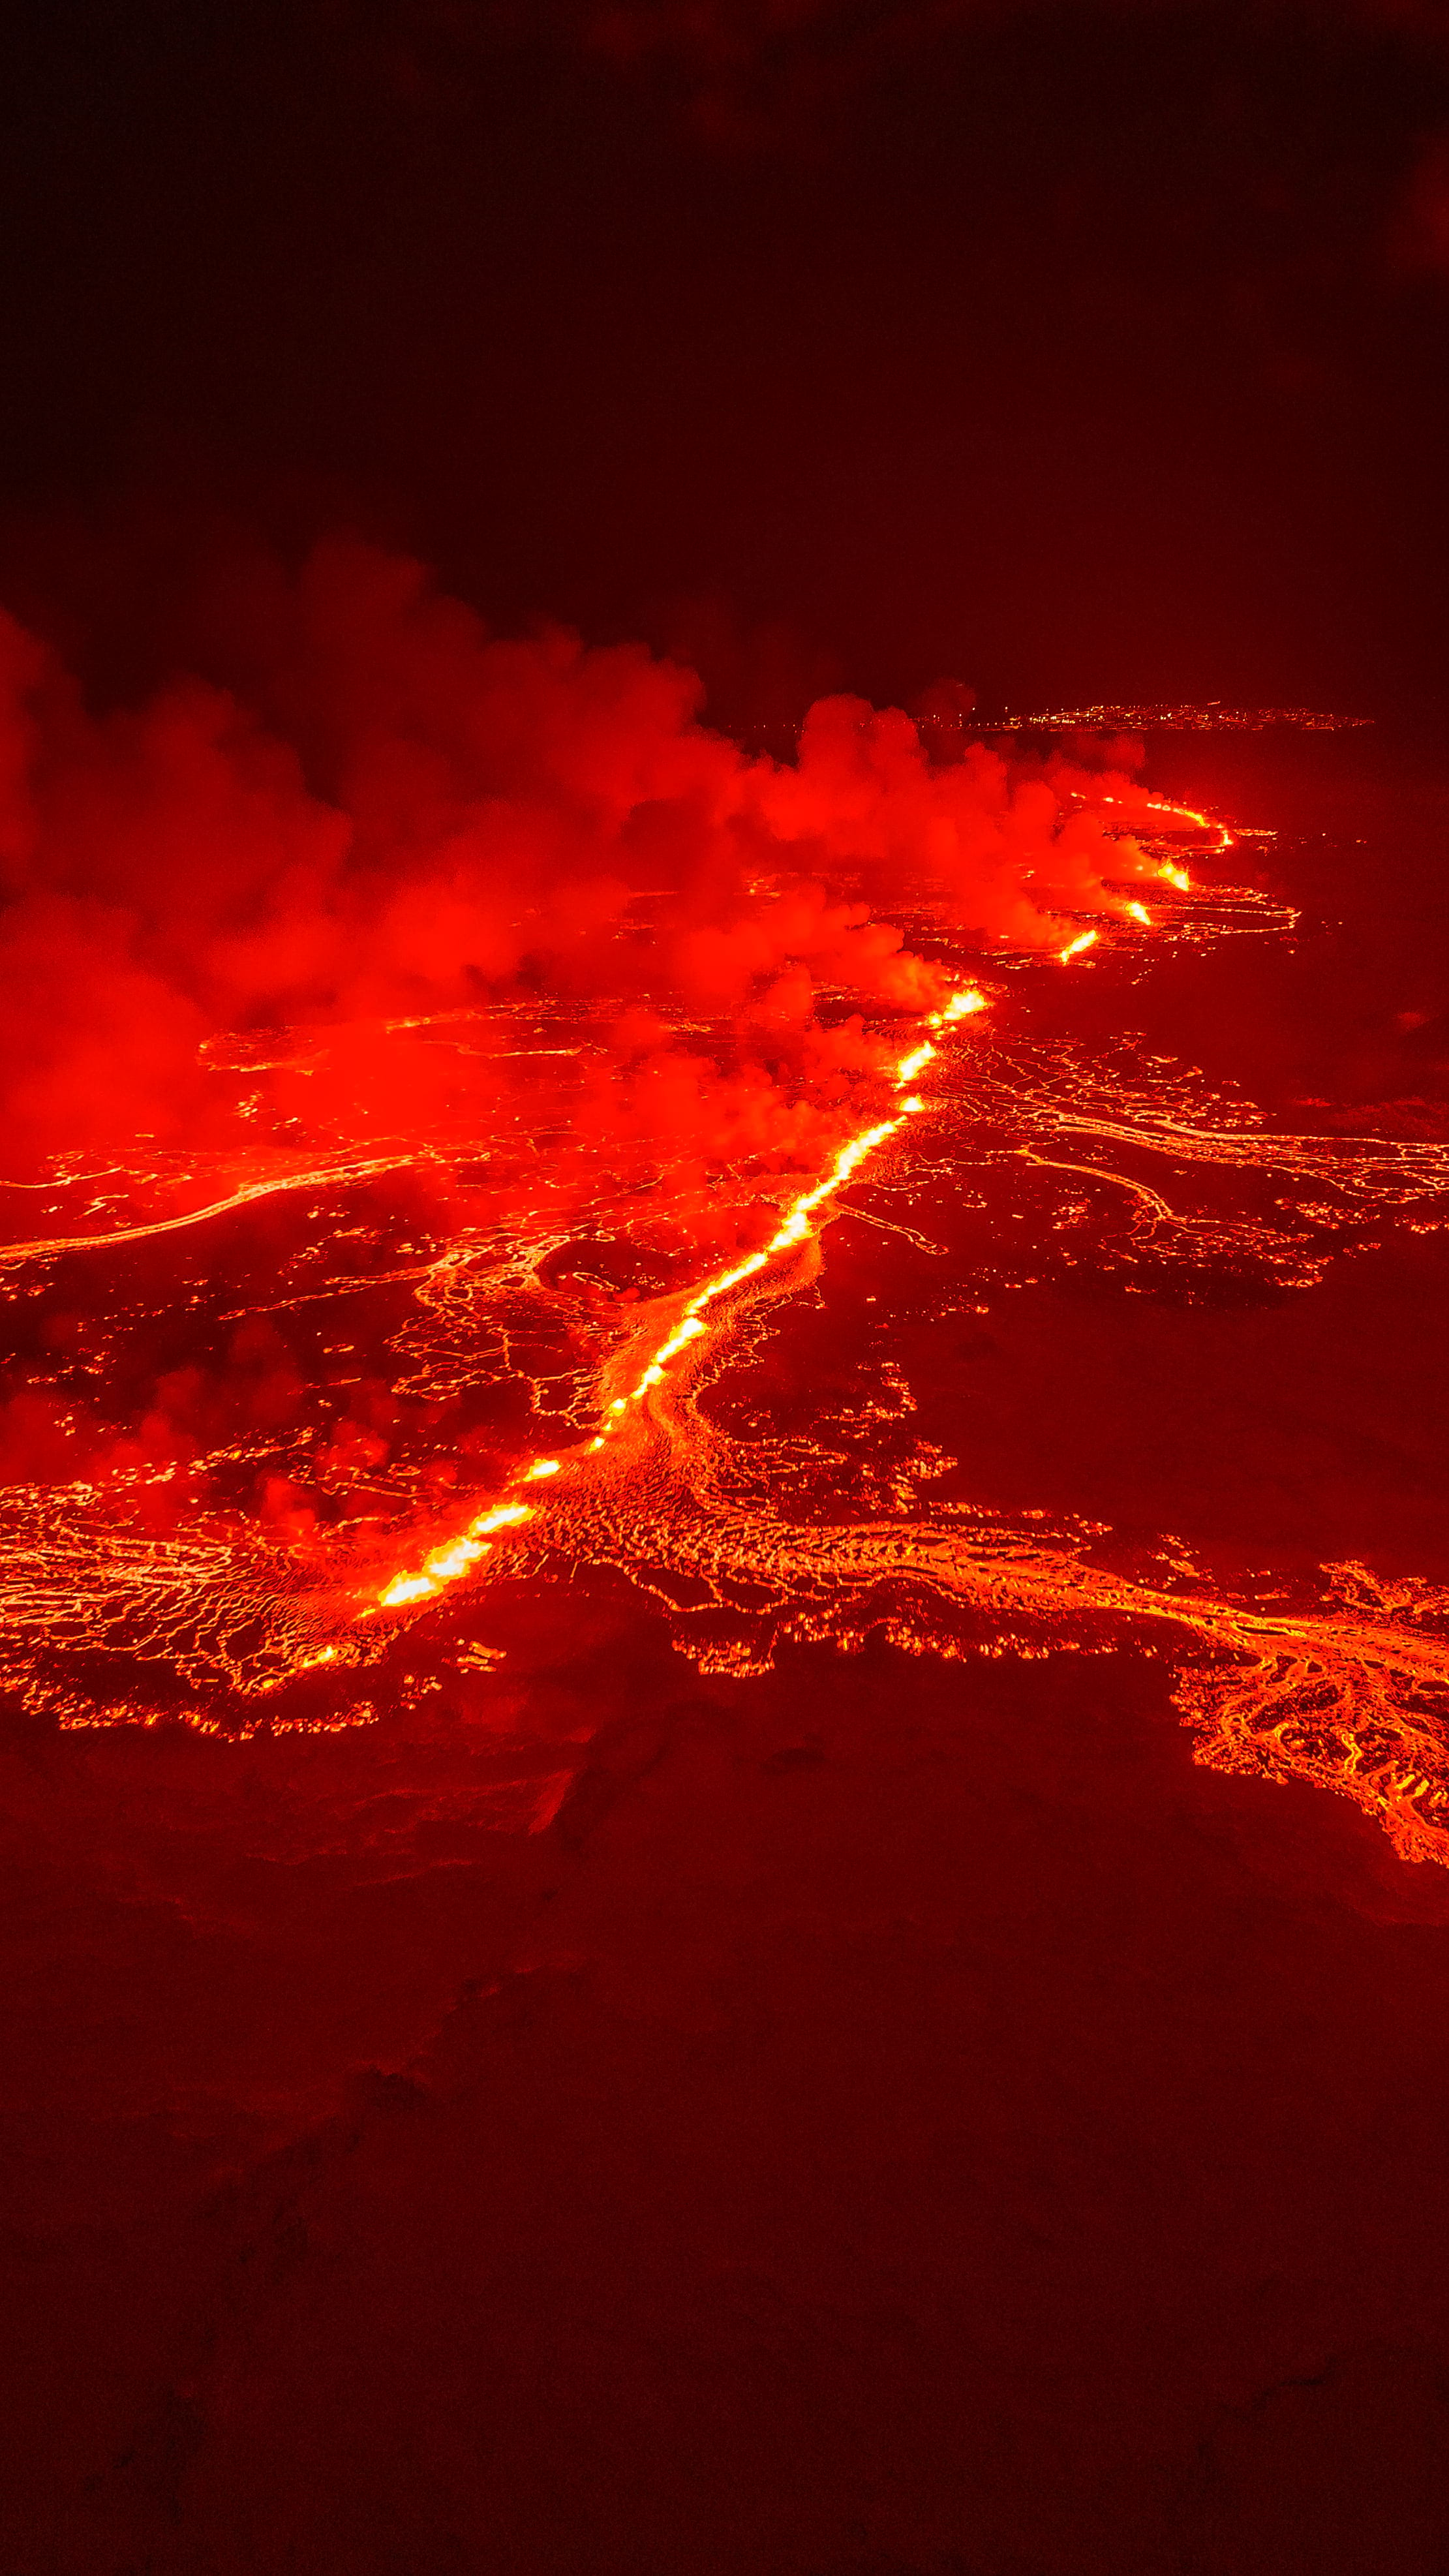 Fissure volcano in Iceland